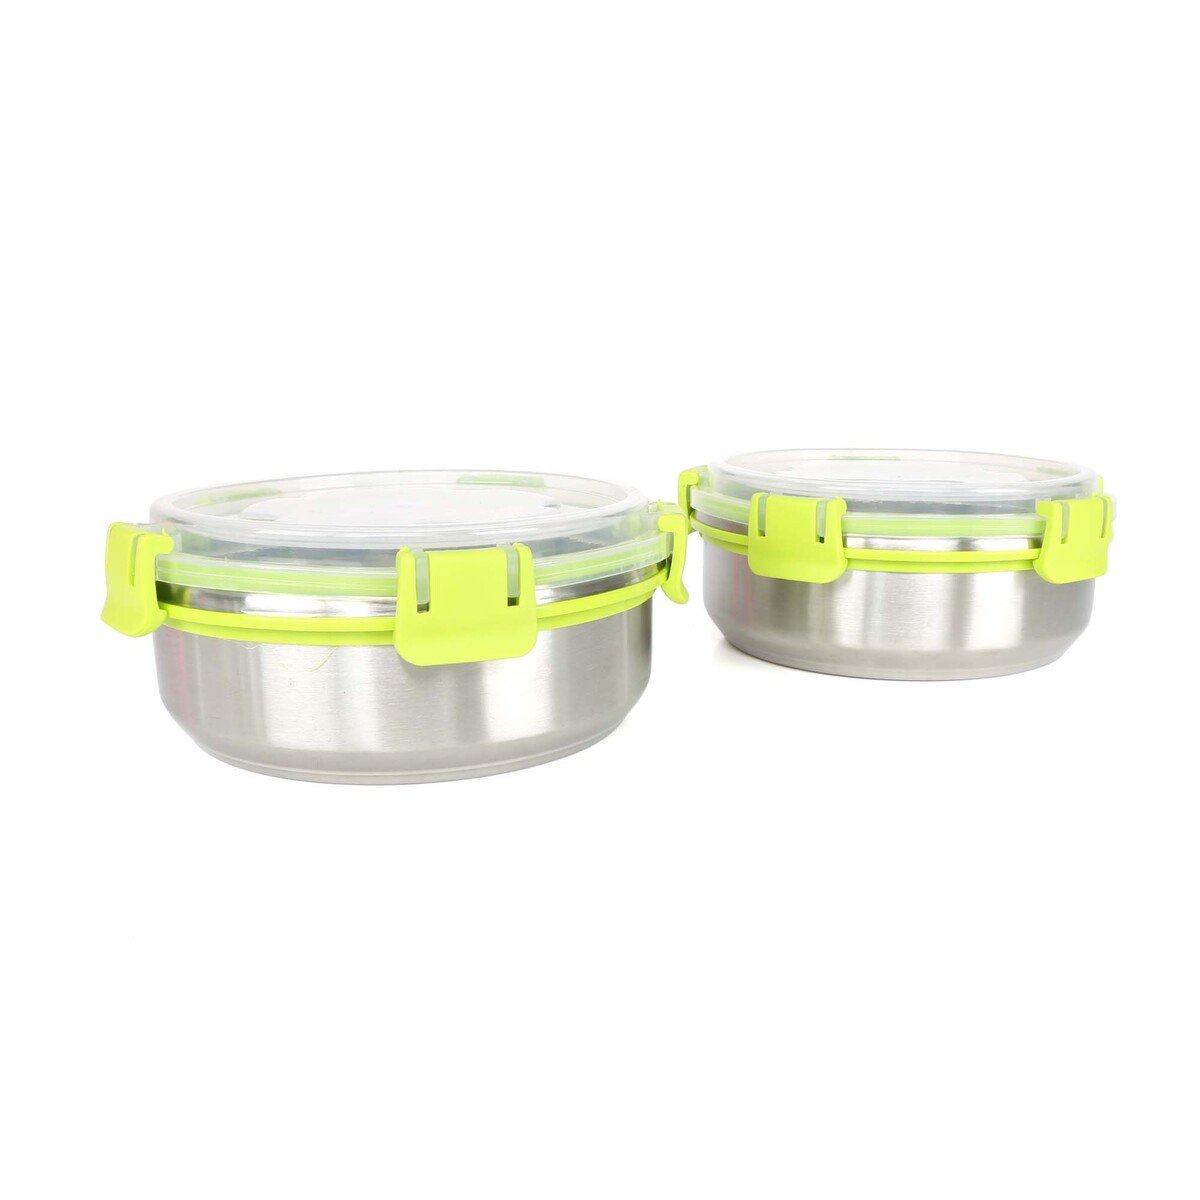 LV Stainless Steel Food Containers 2pcs Set BOB